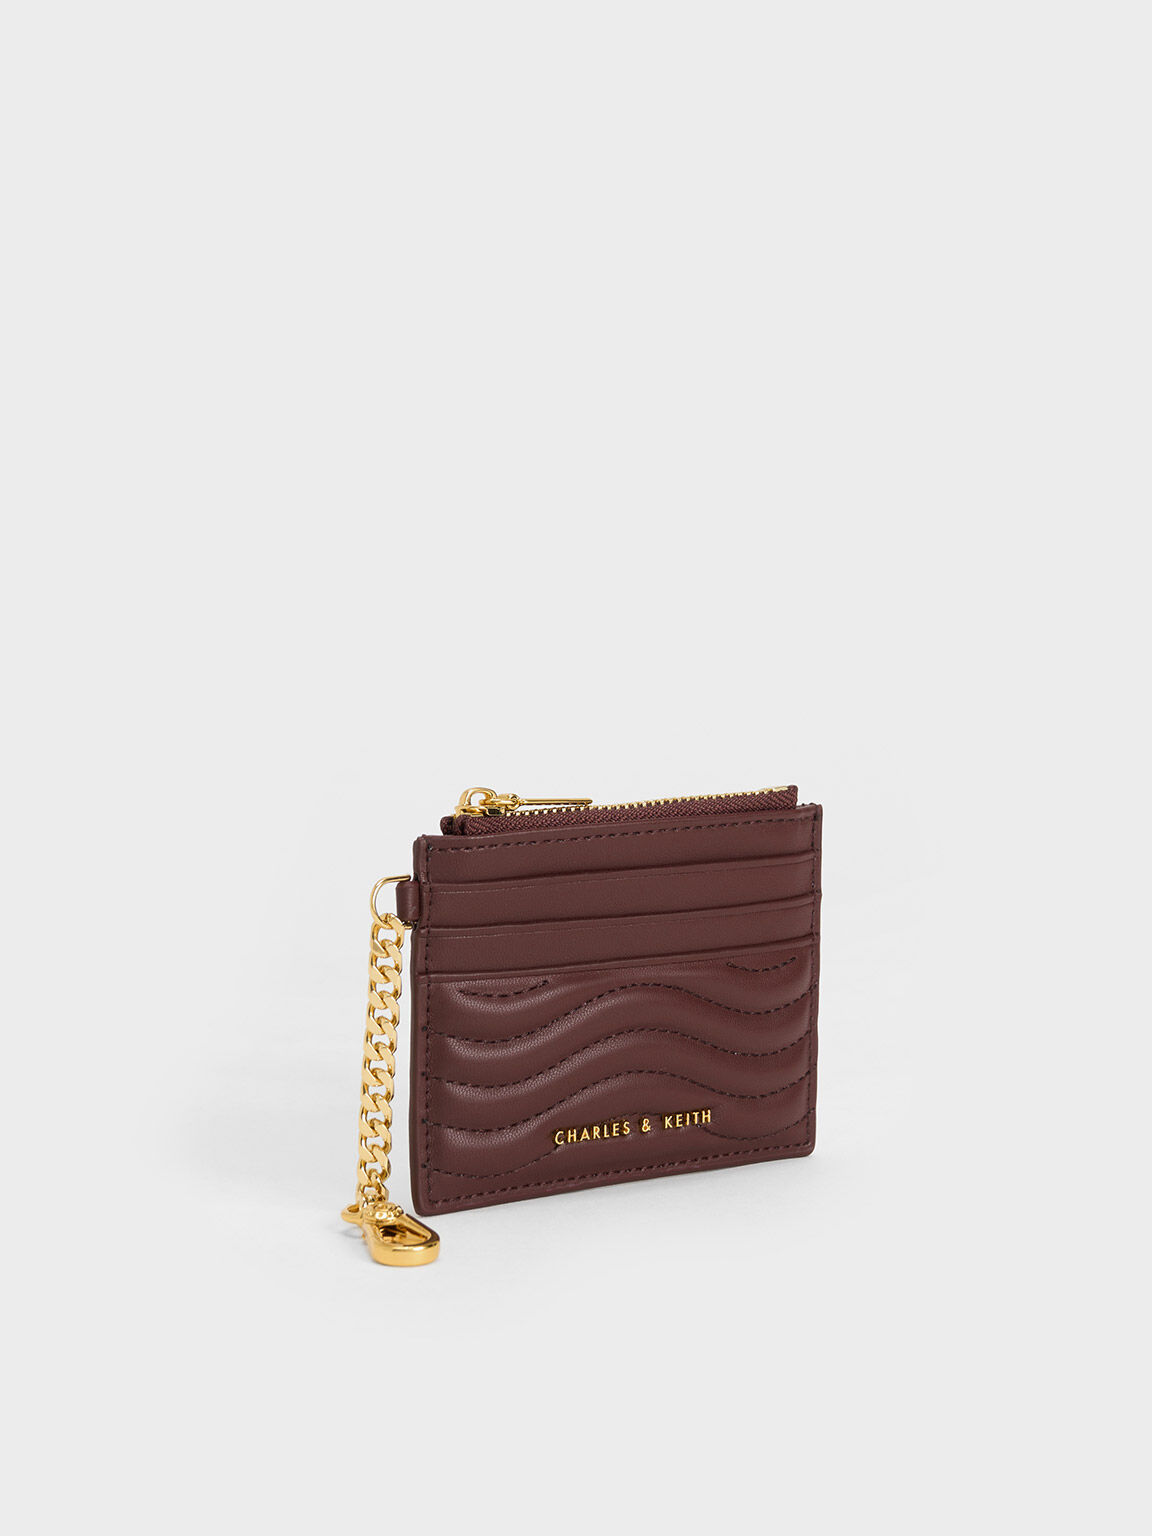 Buy Charles Keith Gift Cards & Gift Vouchers in Kuwait